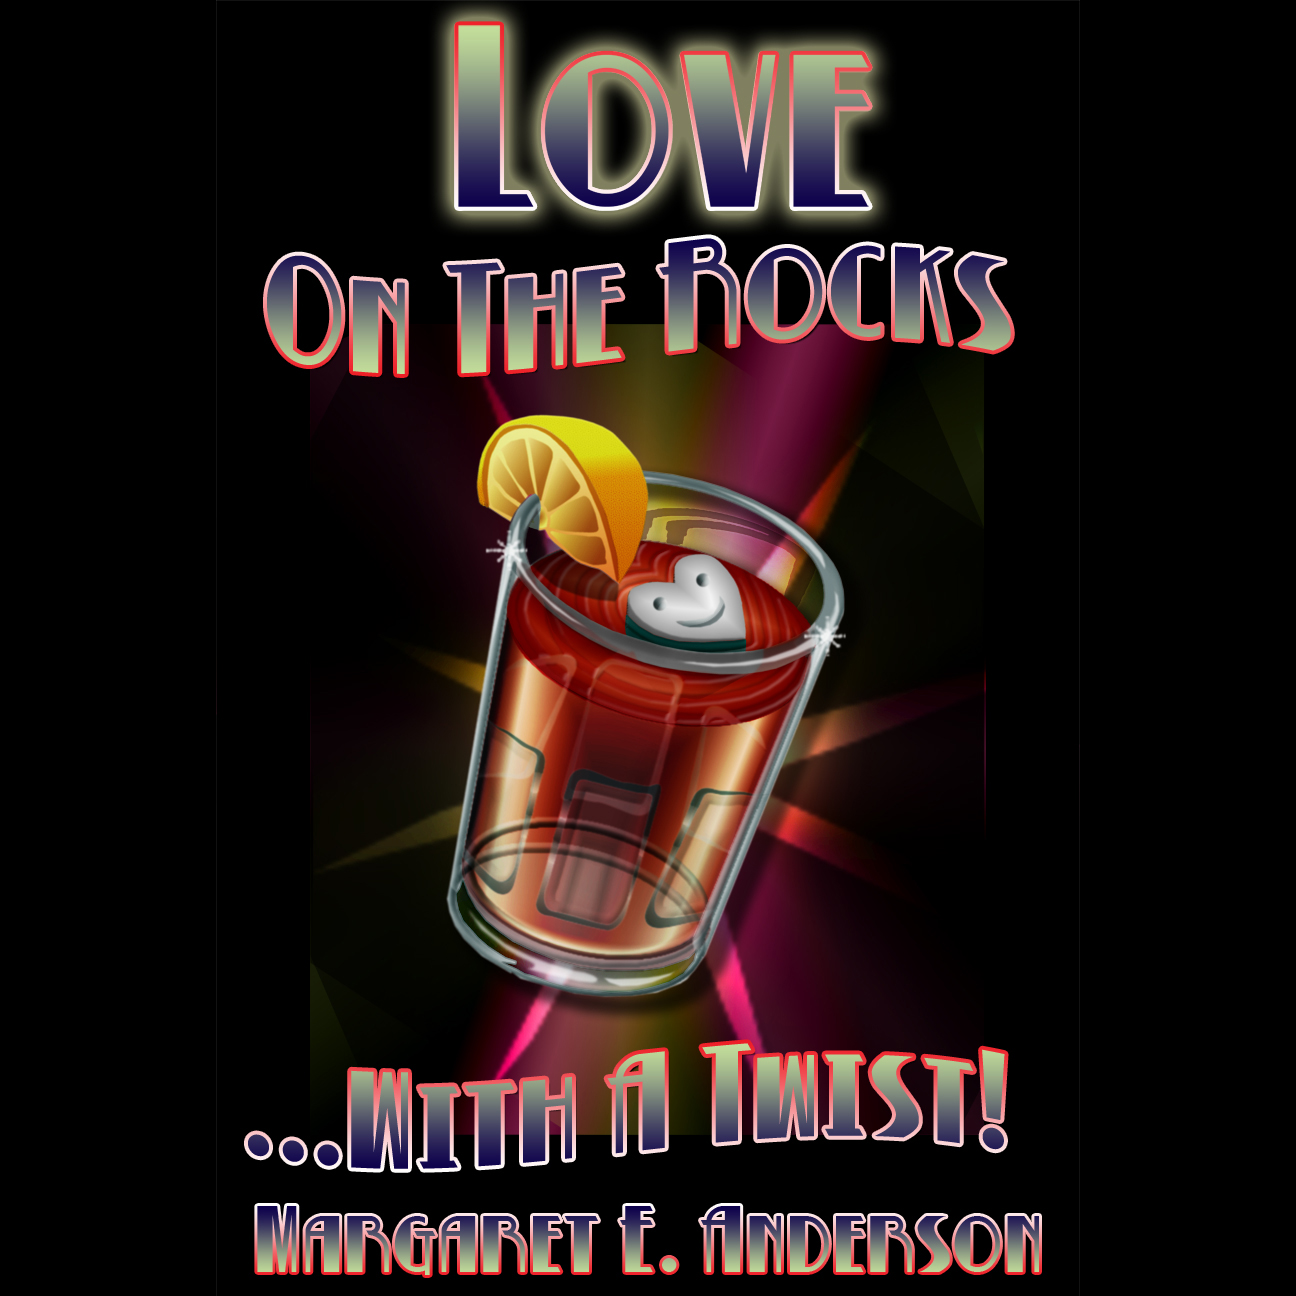 Love on the Rocks - by Margaret Anderson